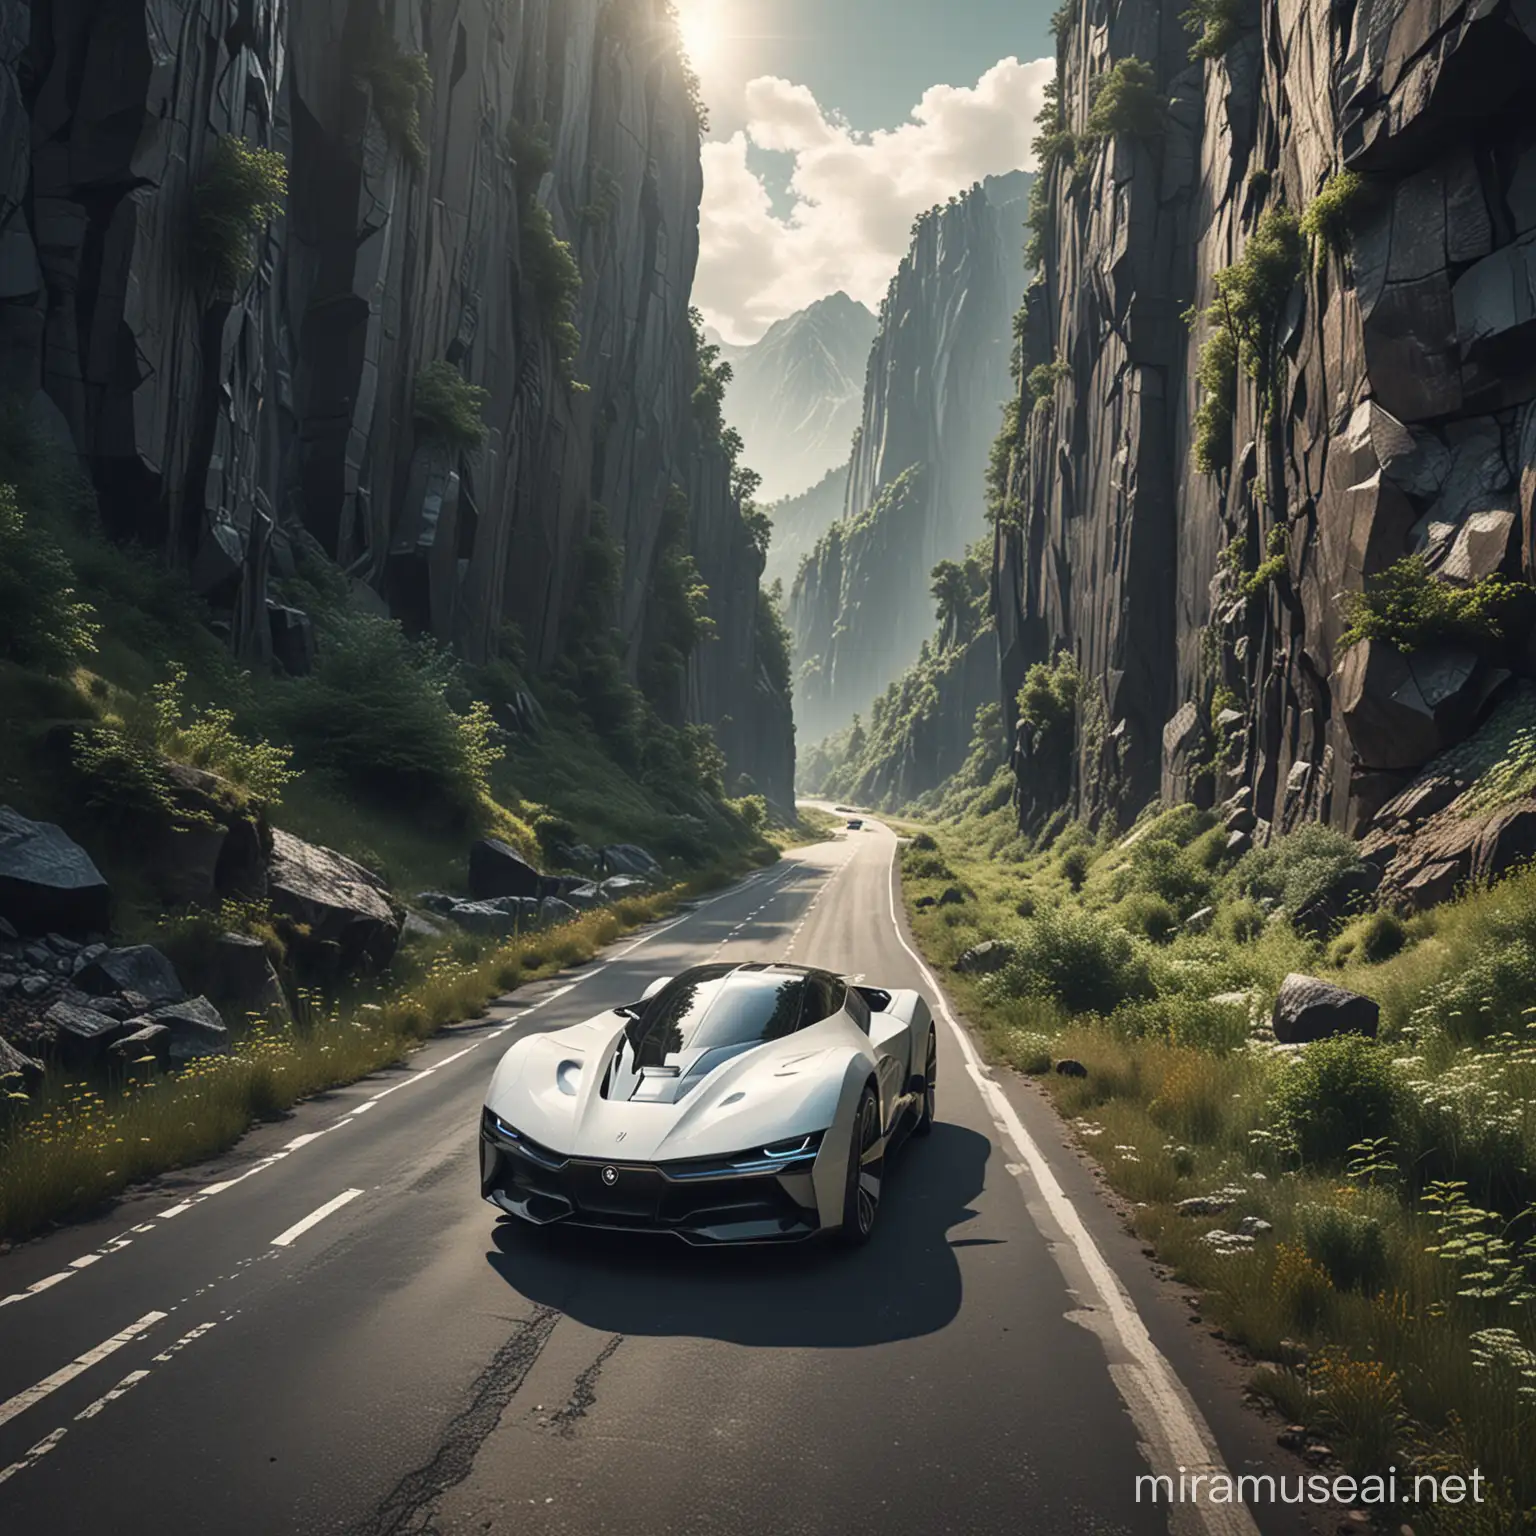   an image of a futuristic car driving through an old mountain road surrounded by nature: